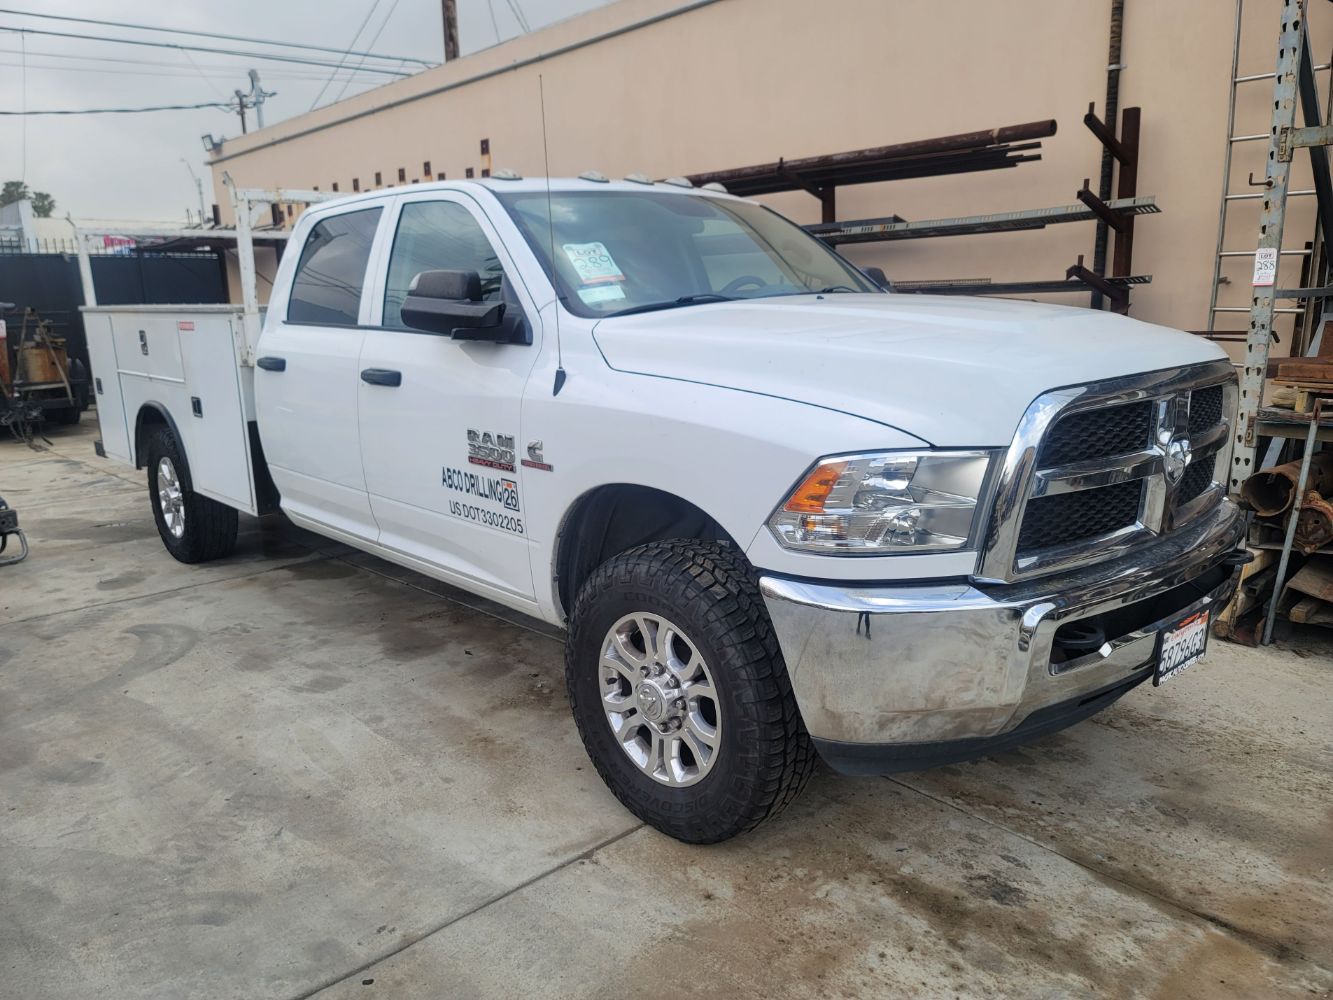 ELEVATOR & CAISSON DRILLING CONTRACTOR: 2018 RAM 3500 UTILITY TRUCK, DRILLING RIGS, DATSUN FORKLIFT, MACHINE SHOP, WELDERS, CASINGS, AUGERS!